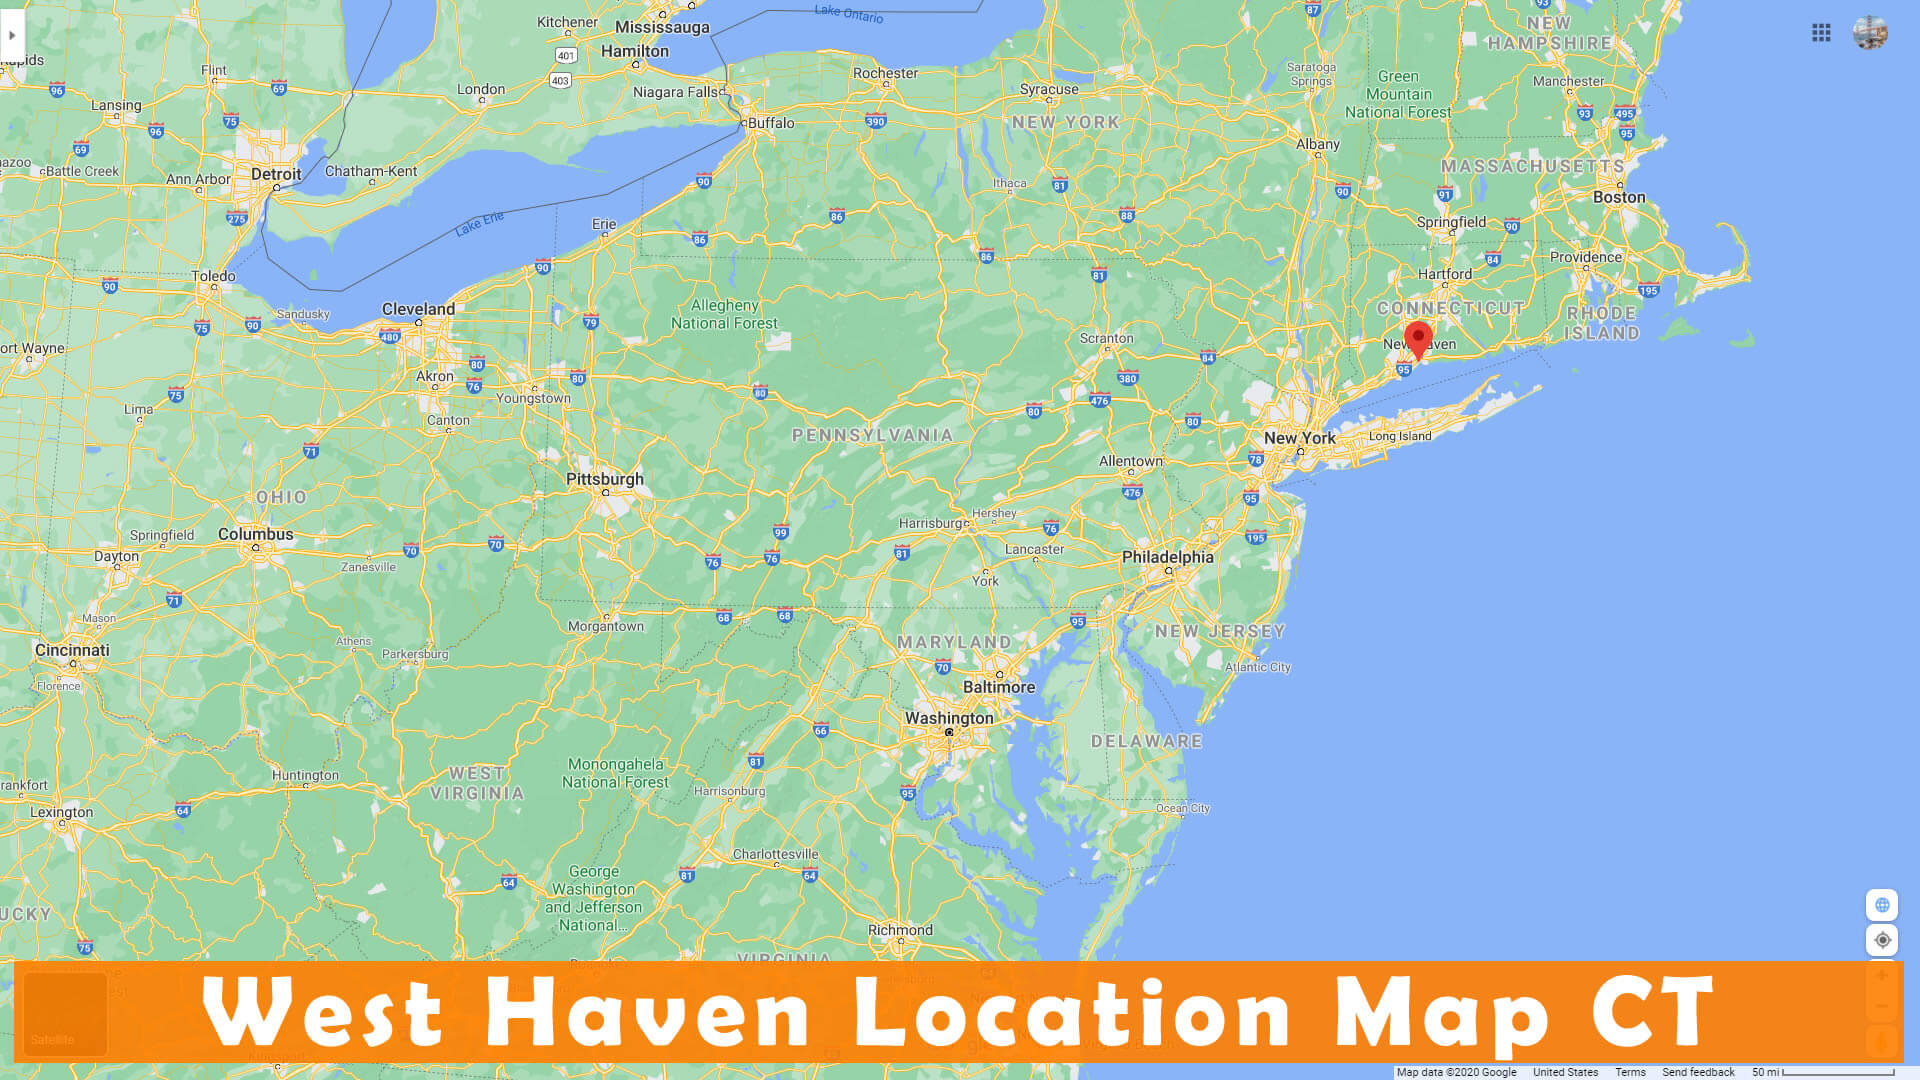 West Haven Location Map CT